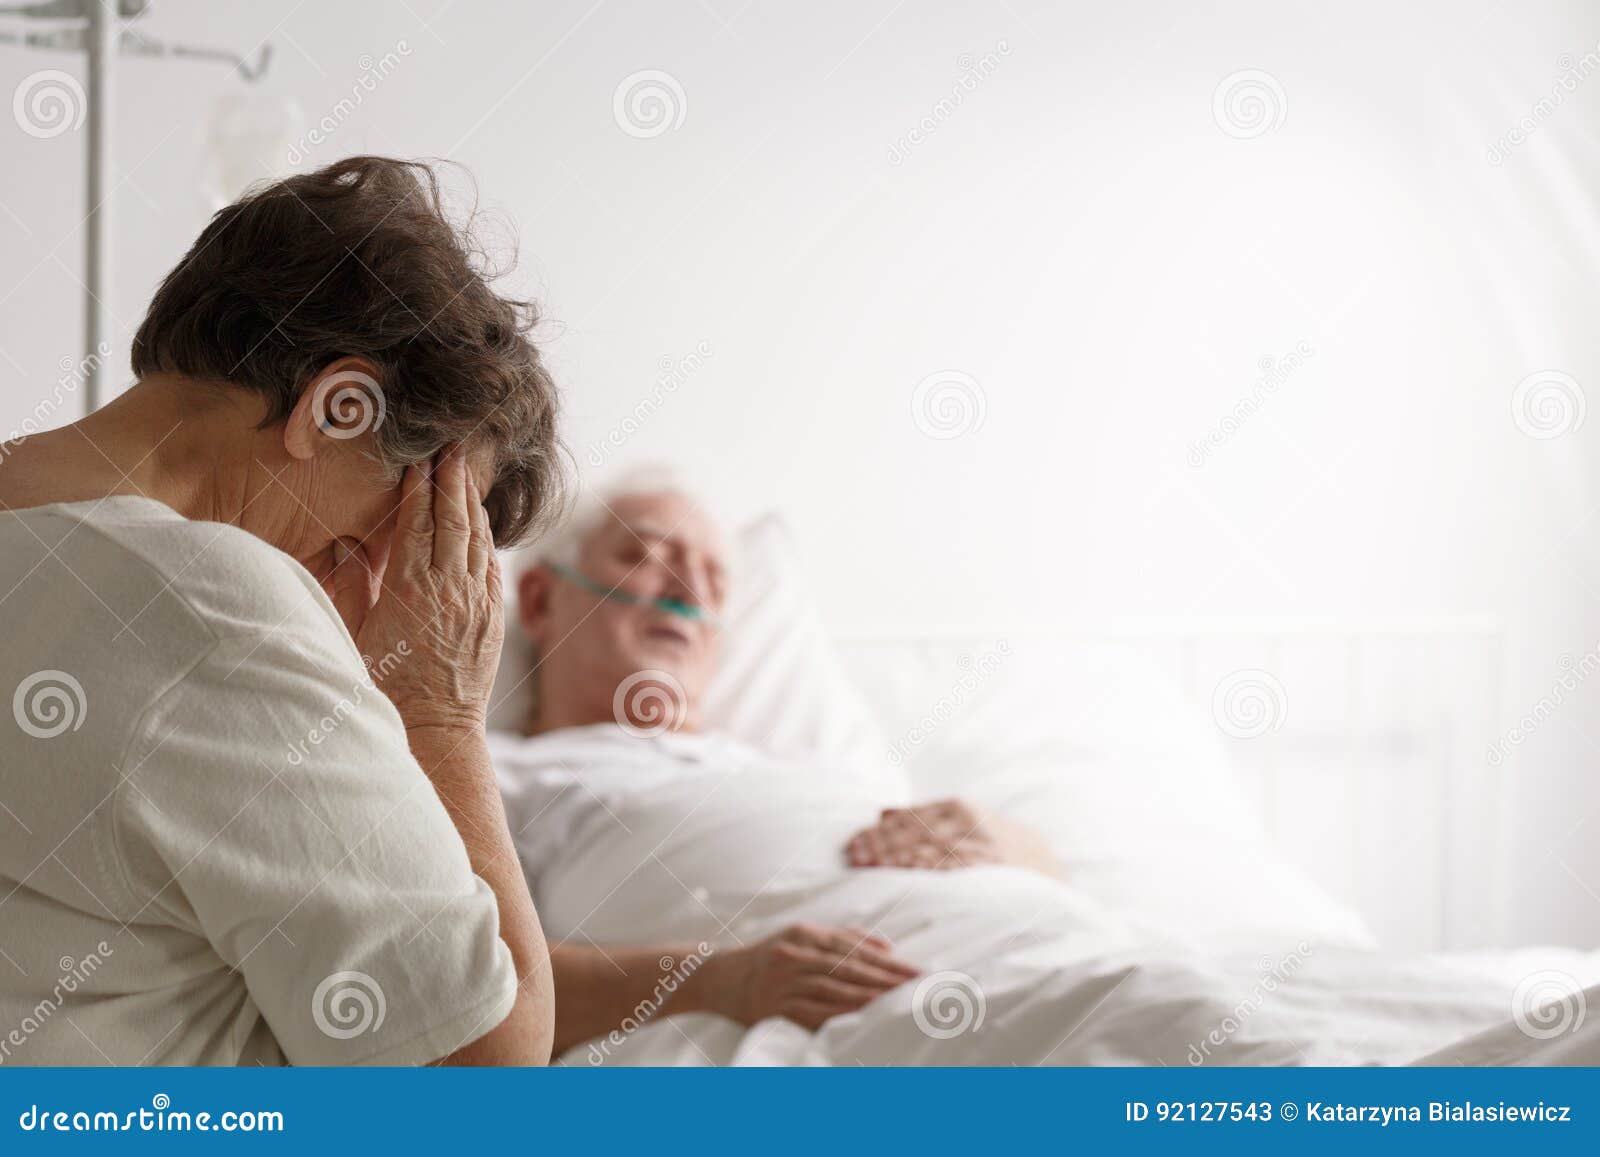 Wife Sitting By Dying Husband Stock Image Image Of Disease Marriage 92127543